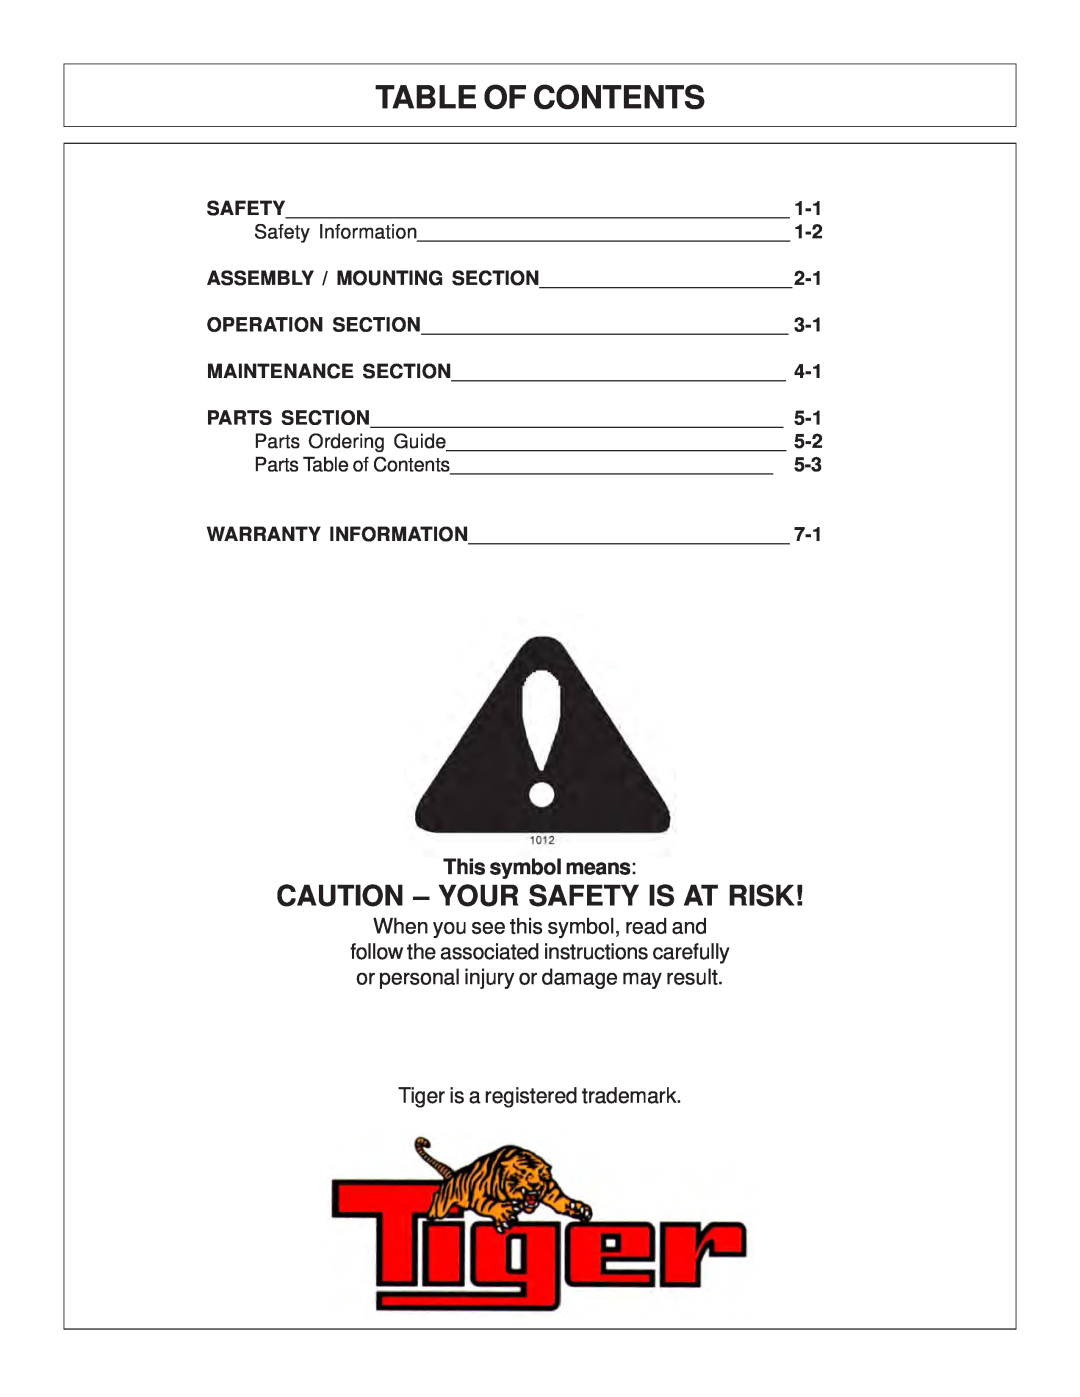 Tiger Products Co., Ltd JD 5093E, JD 5101E, JD 5083E Table Of Contents, Caution - Your Safety Is At Risk, This symbol means 